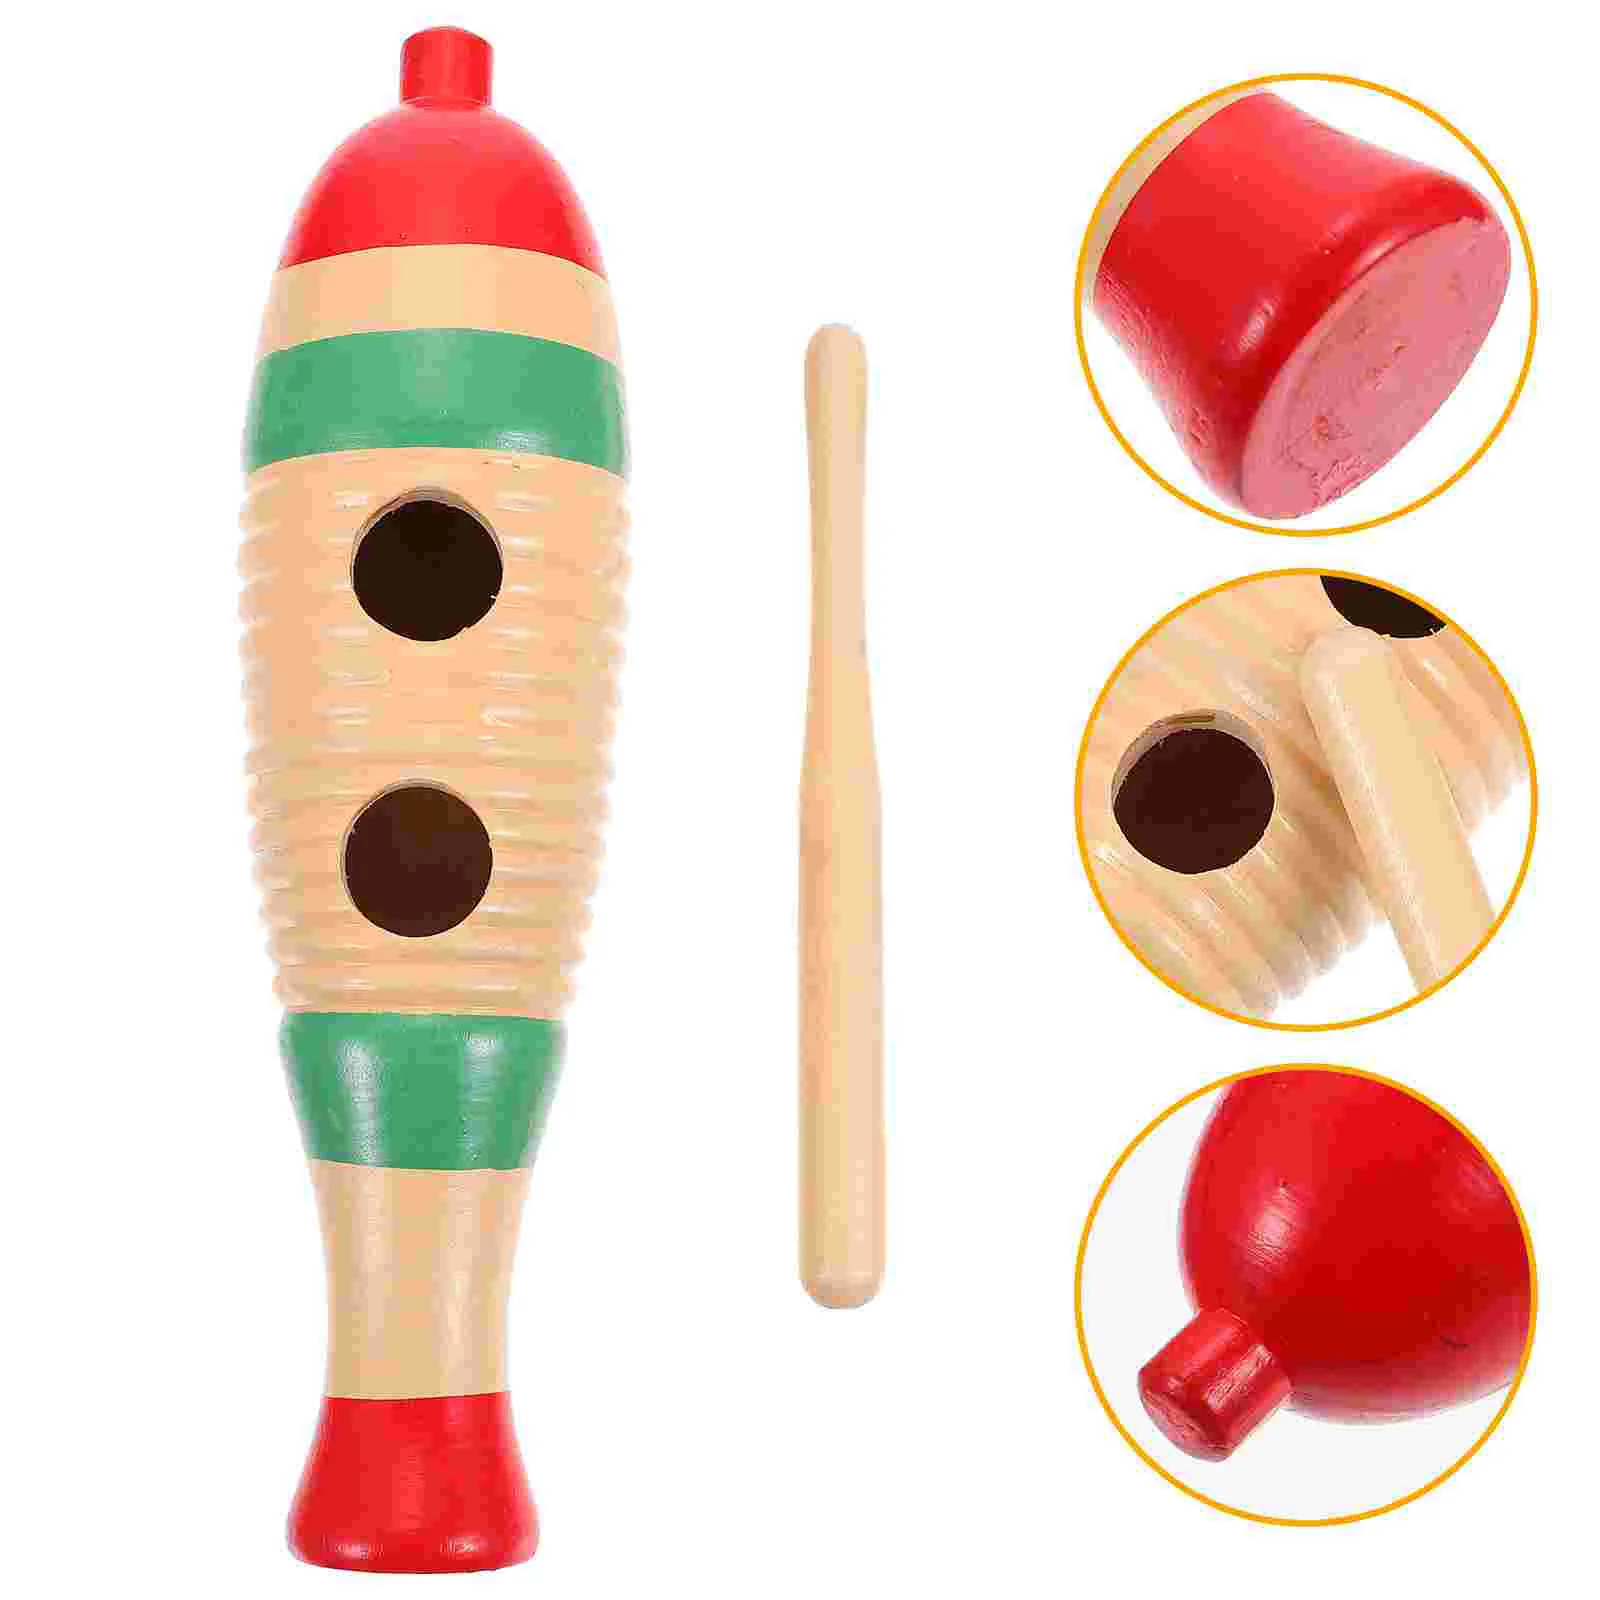 

Children's Percussion Instrument Musical Toy Educational Wood Fish Shaped Guiro Childrens Toys